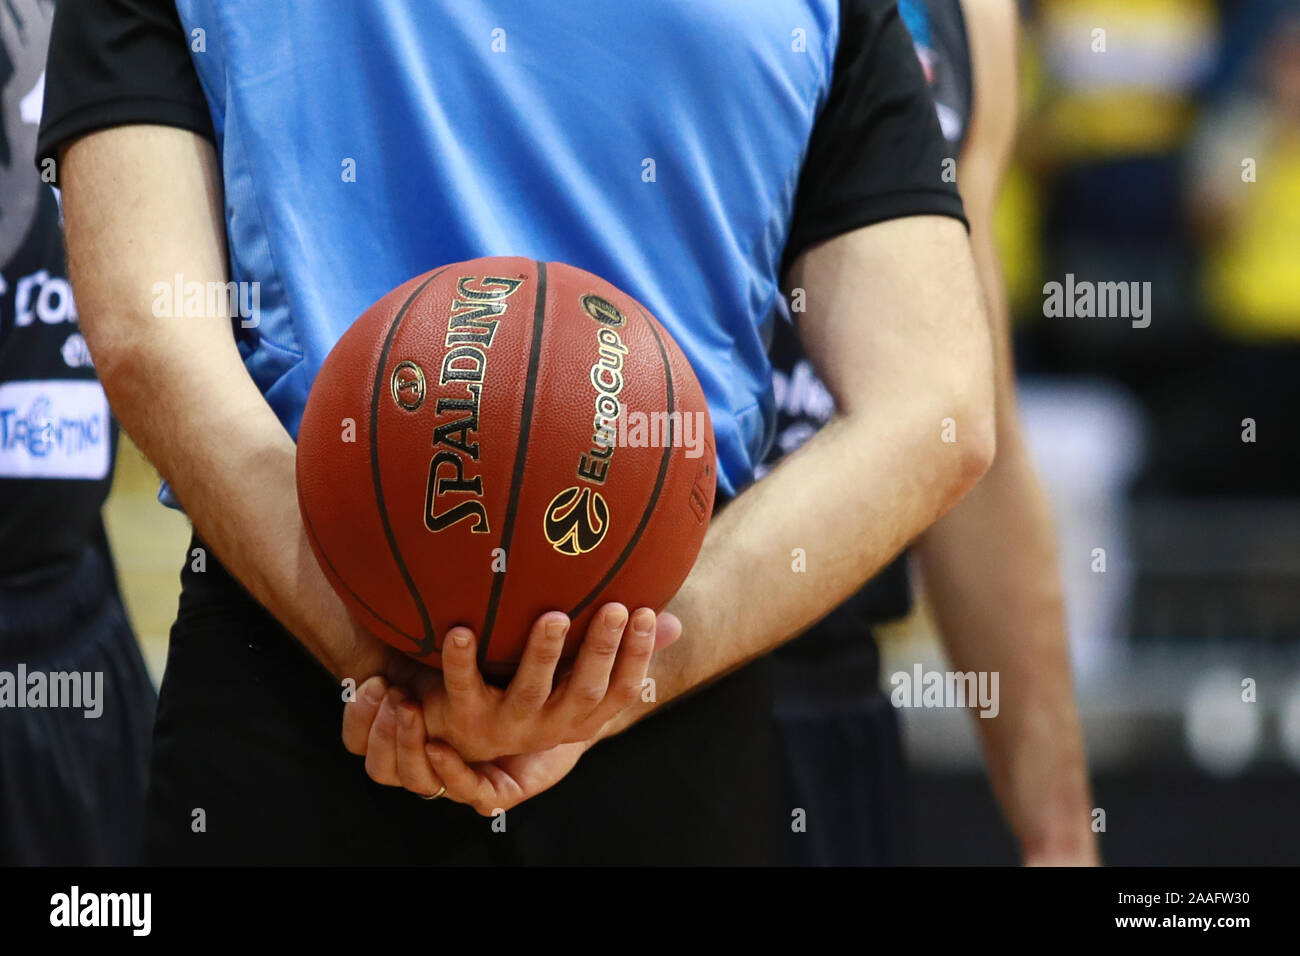 Oldenburg, Germany, November 20, 2019: a referee holds the official Eurocup  game ball during the a Eurocup basketball match Stock Photo - Alamy